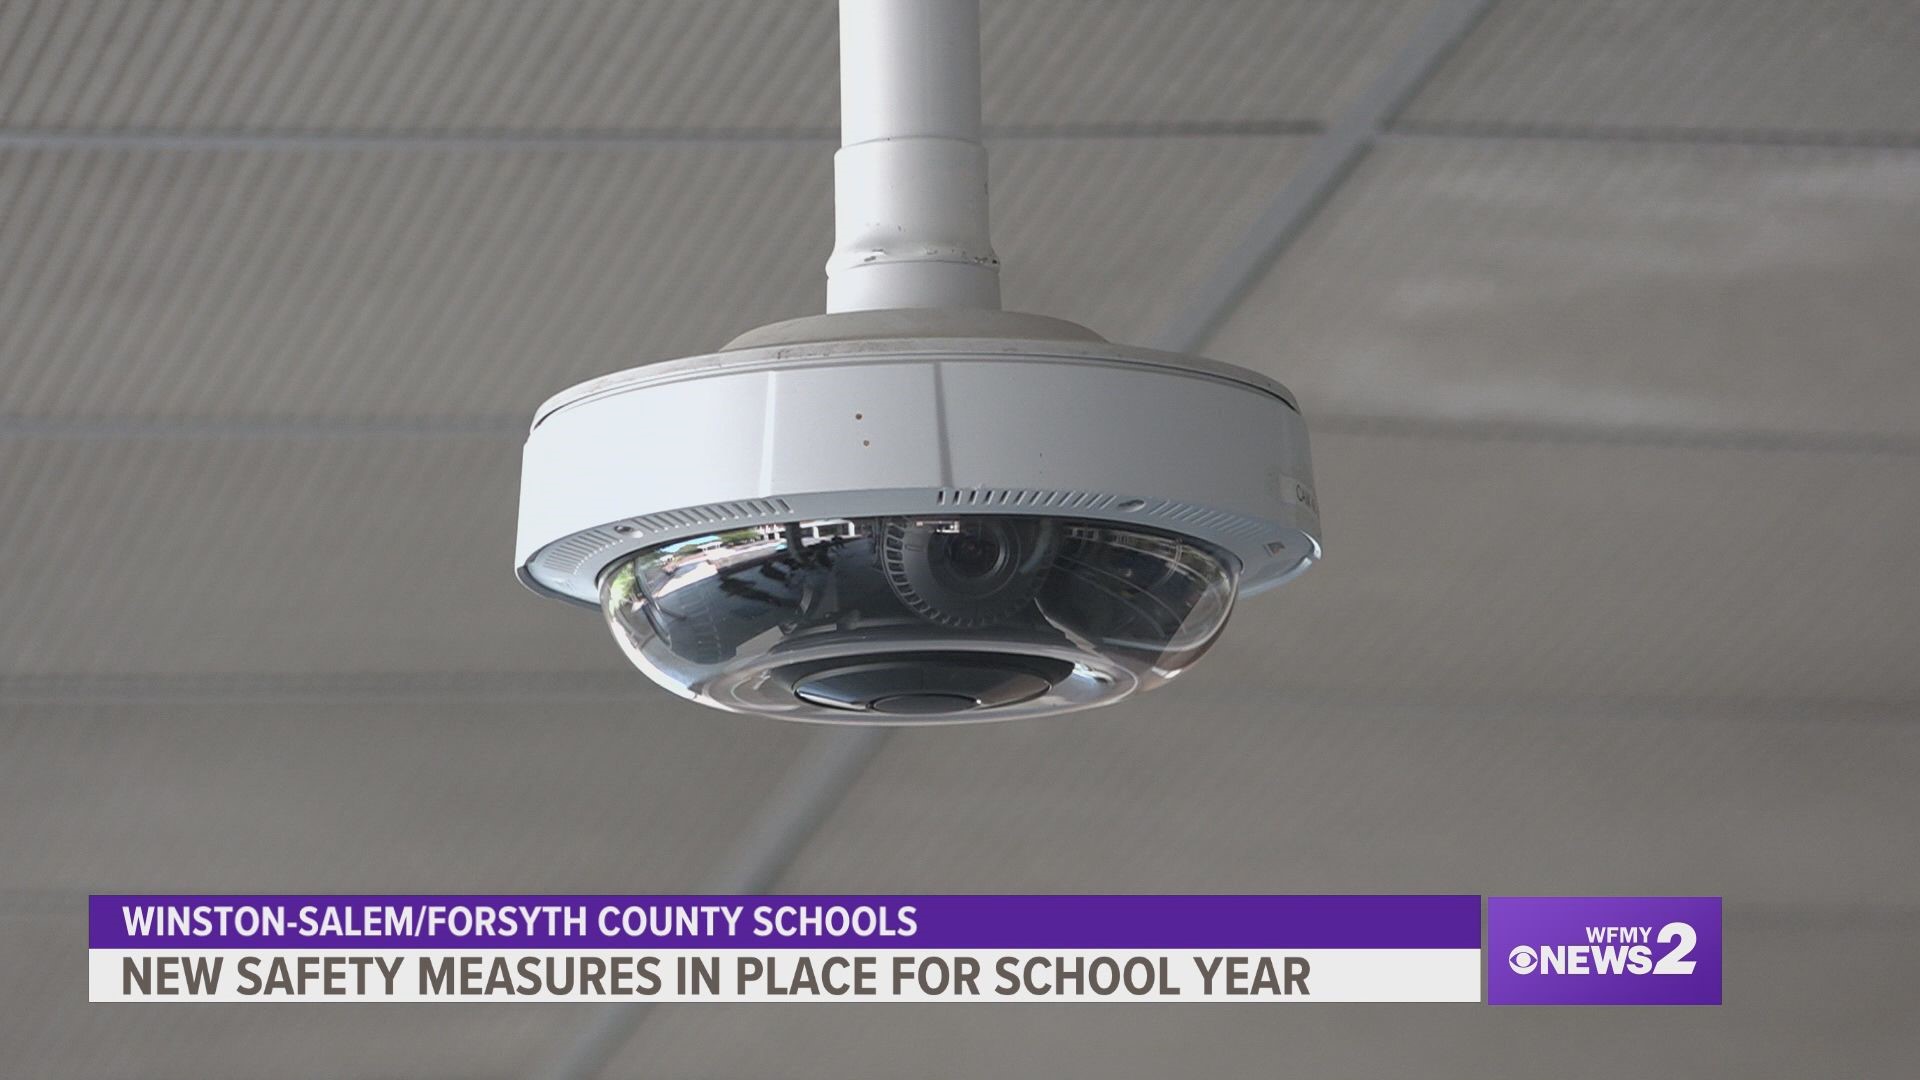 Winston-Salem/Forsyth County Schools shares changes to school safety and security